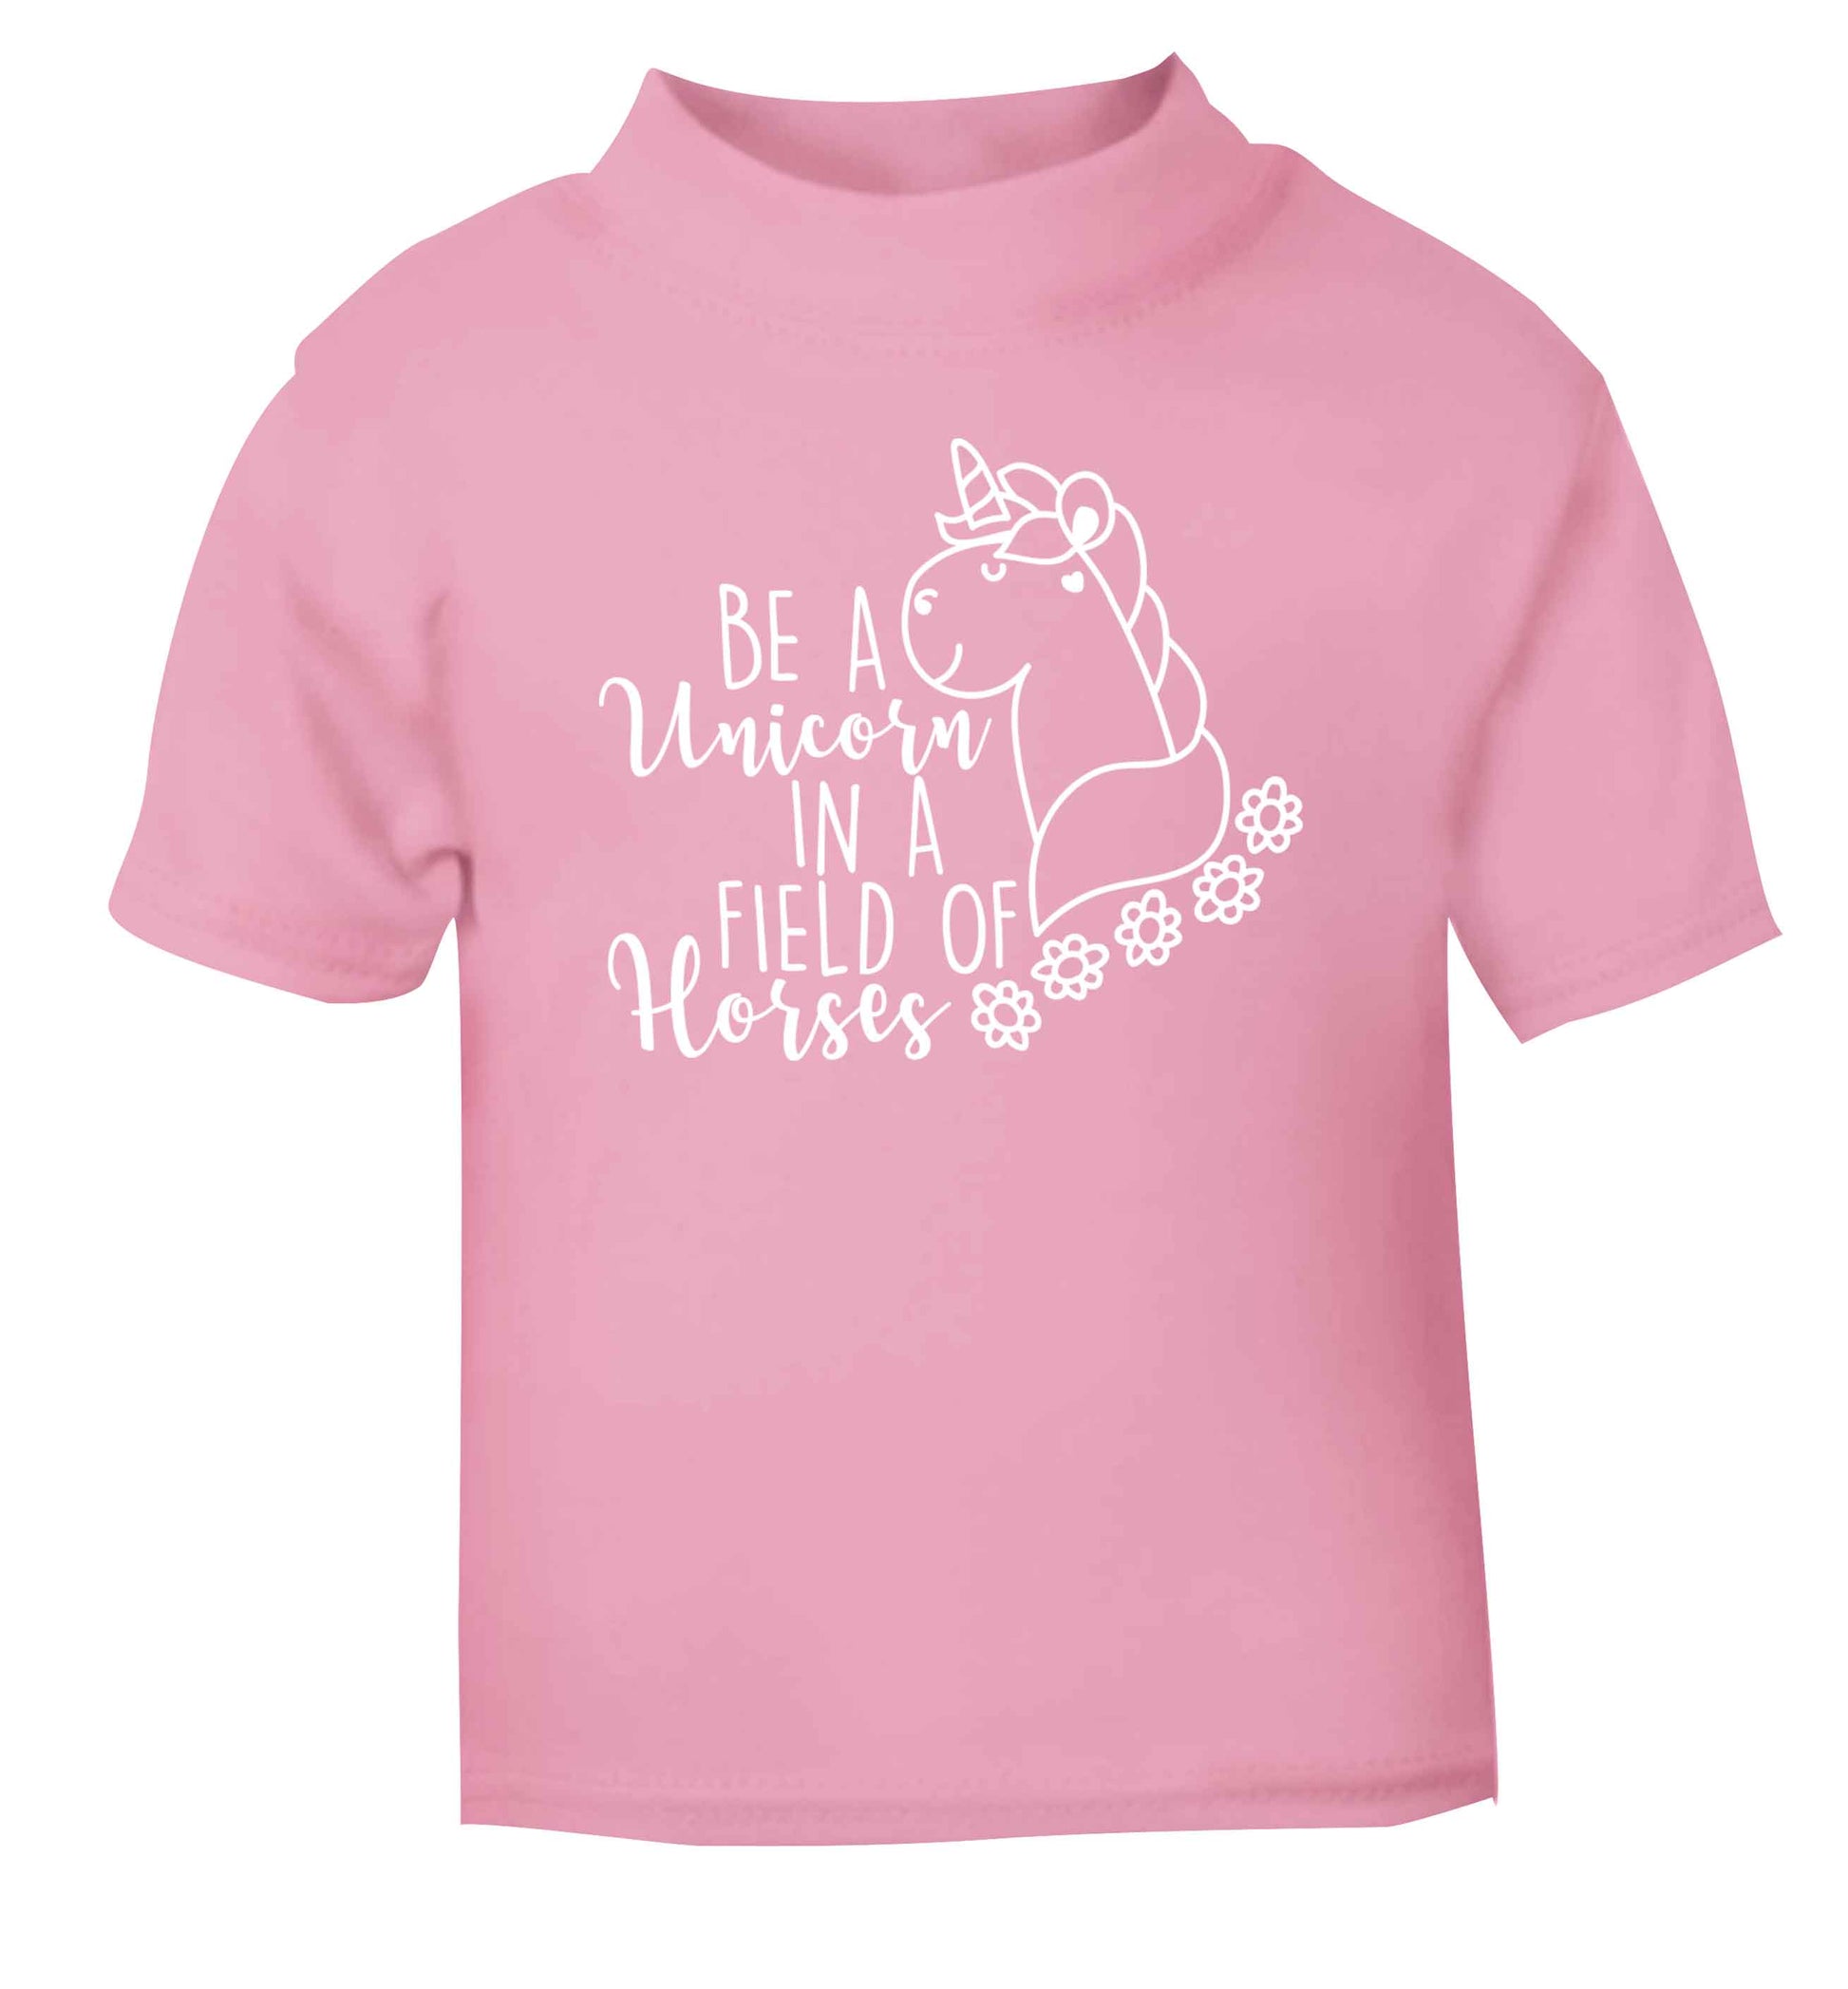 Be a unicorn in a field of horses light pink Baby Toddler Tshirt 2 Years